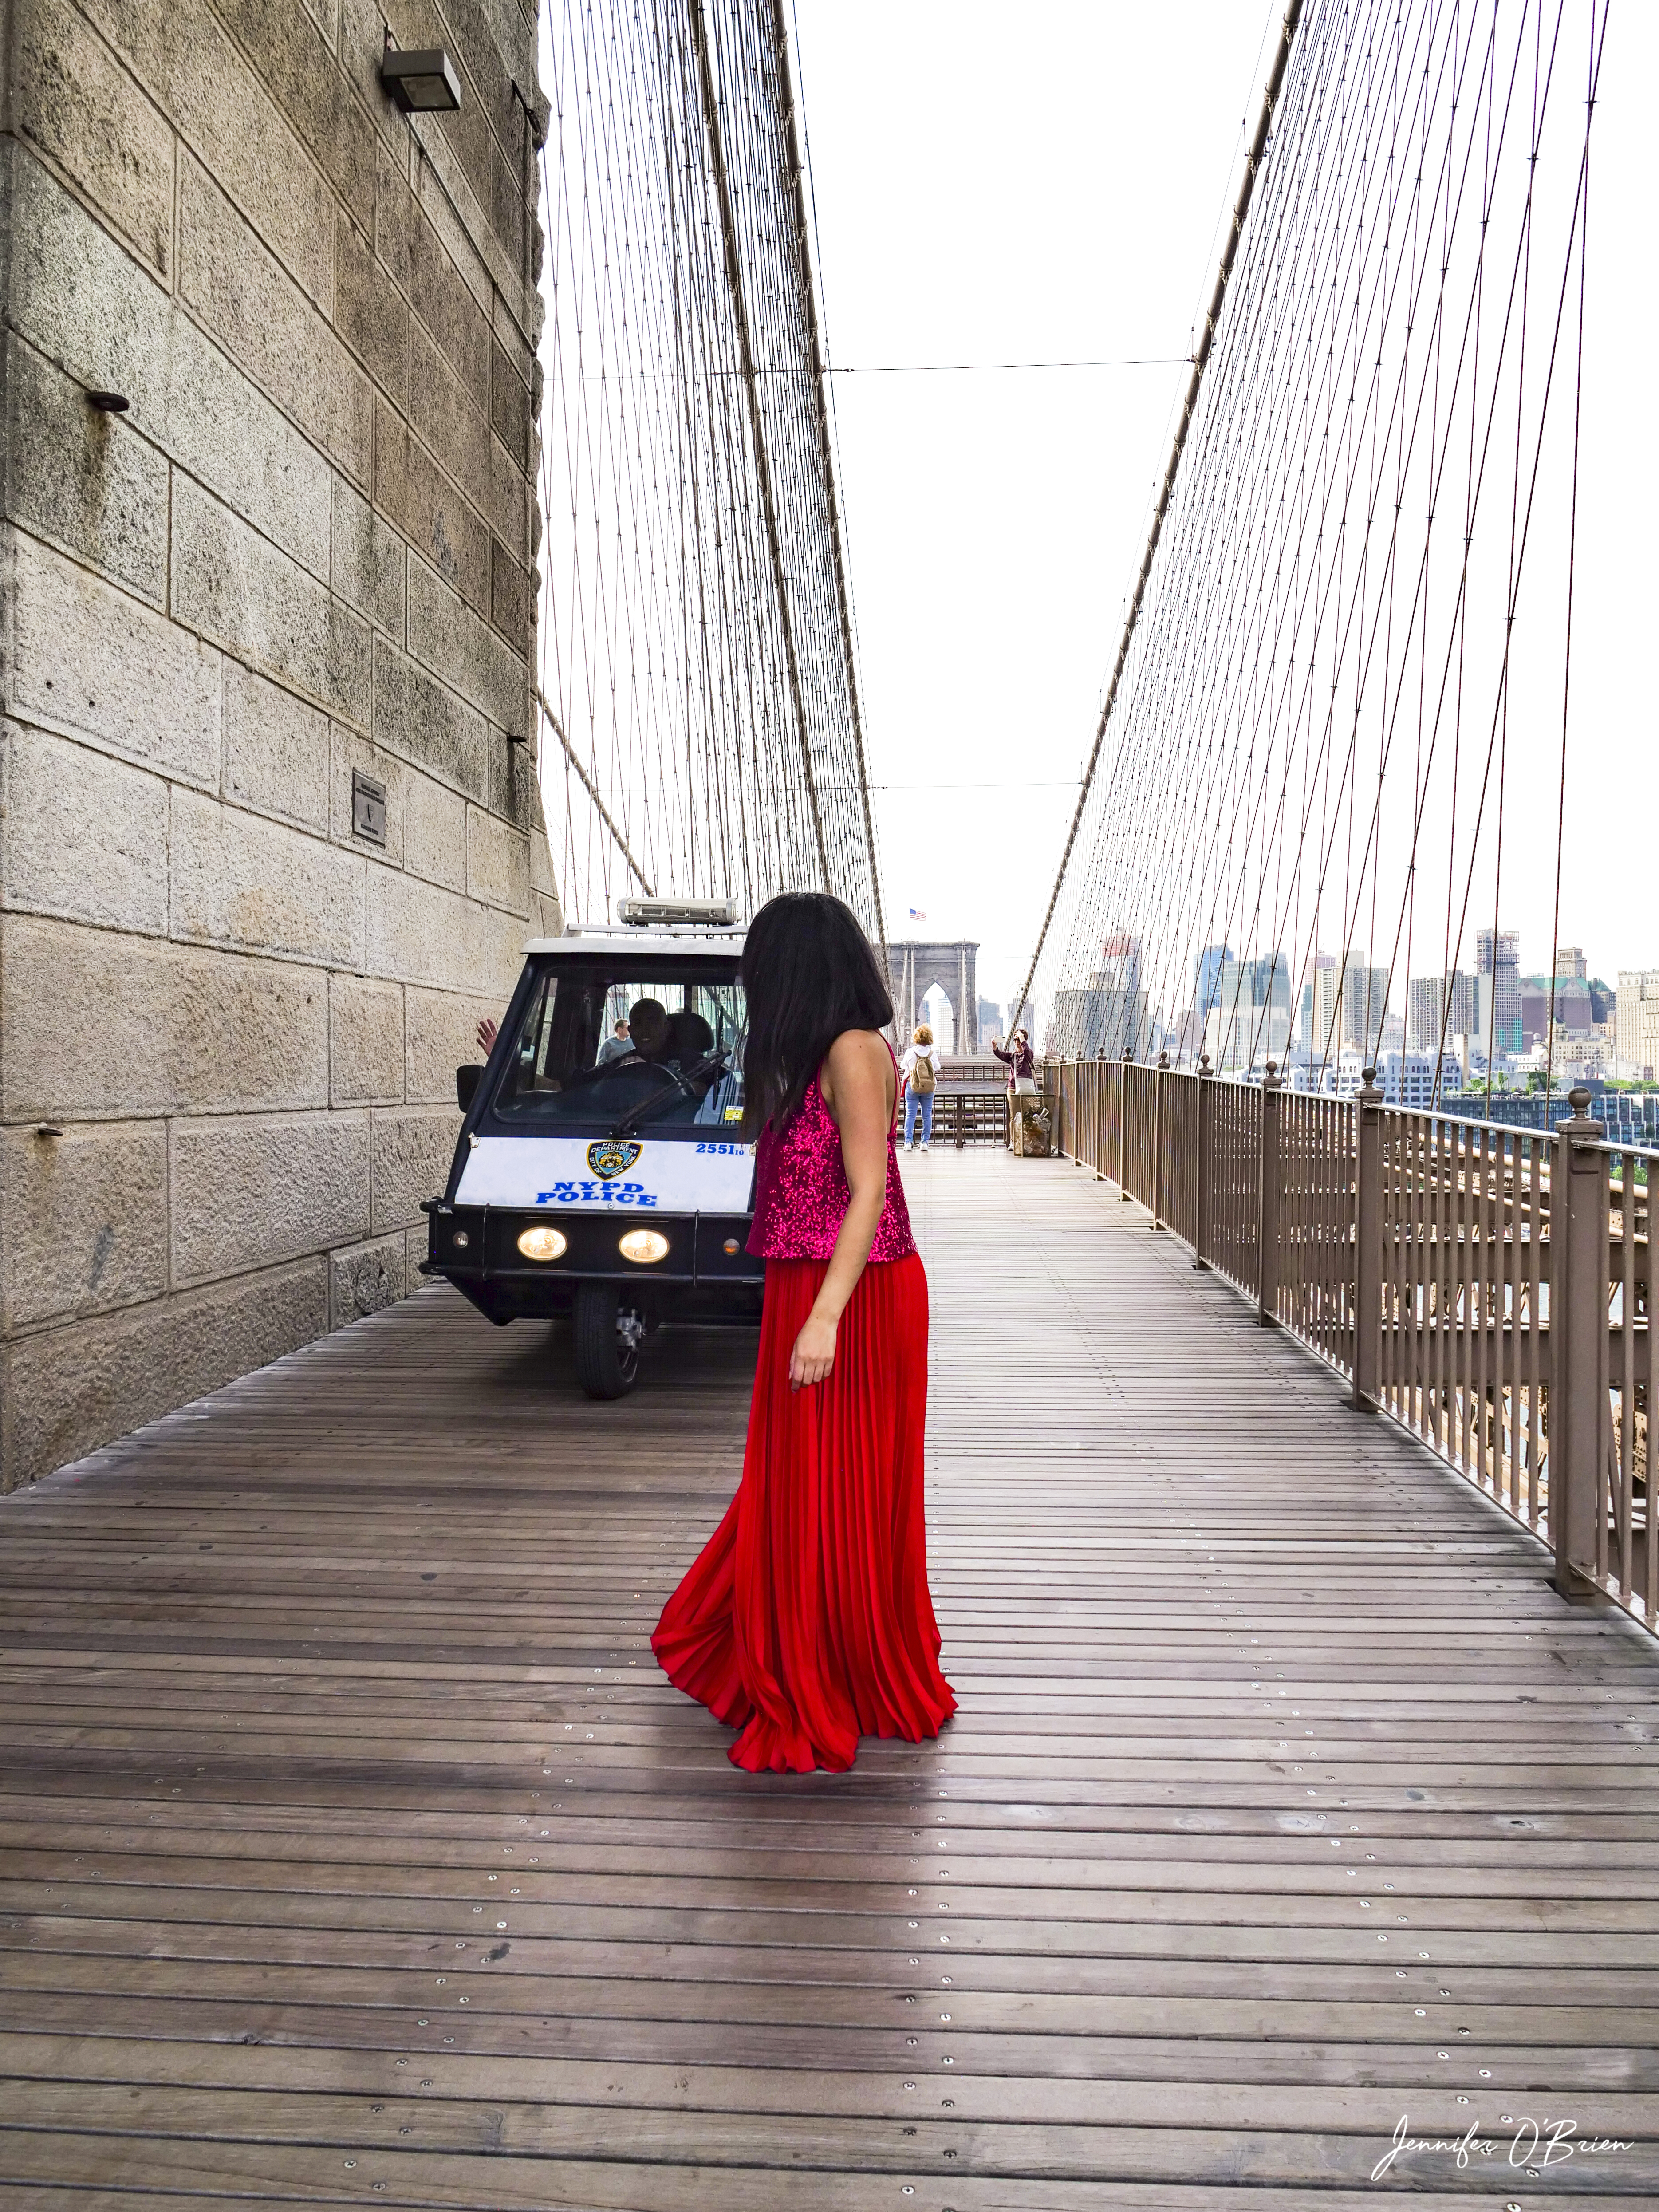 Top Instagram Photos of the Brooklyn Bridge The Travel Women Tower NYPD police NYC bike mini car